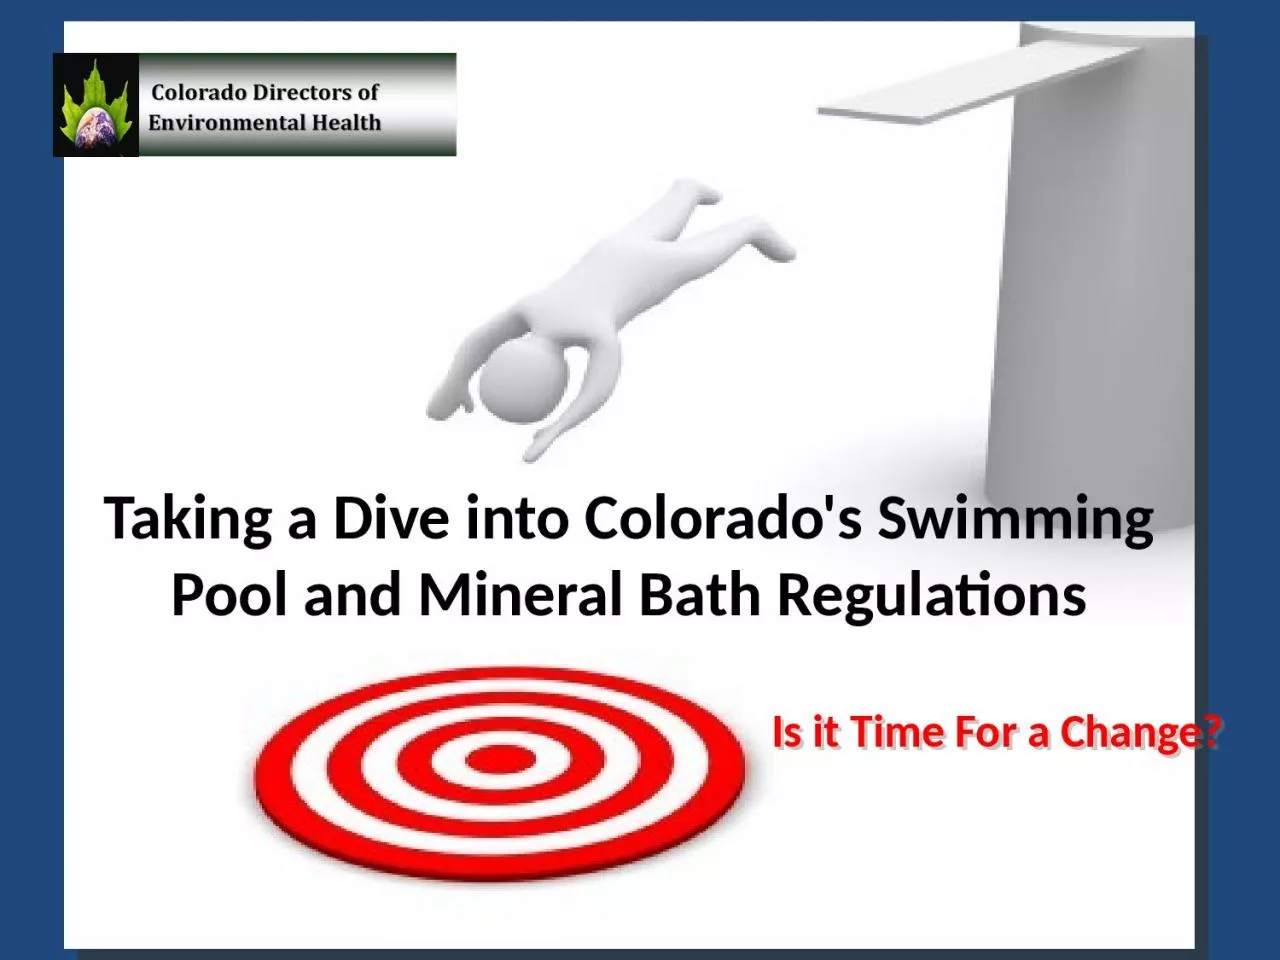 Taking a Dive into Colorado's Swimming Pool and Mineral Bath Regulations